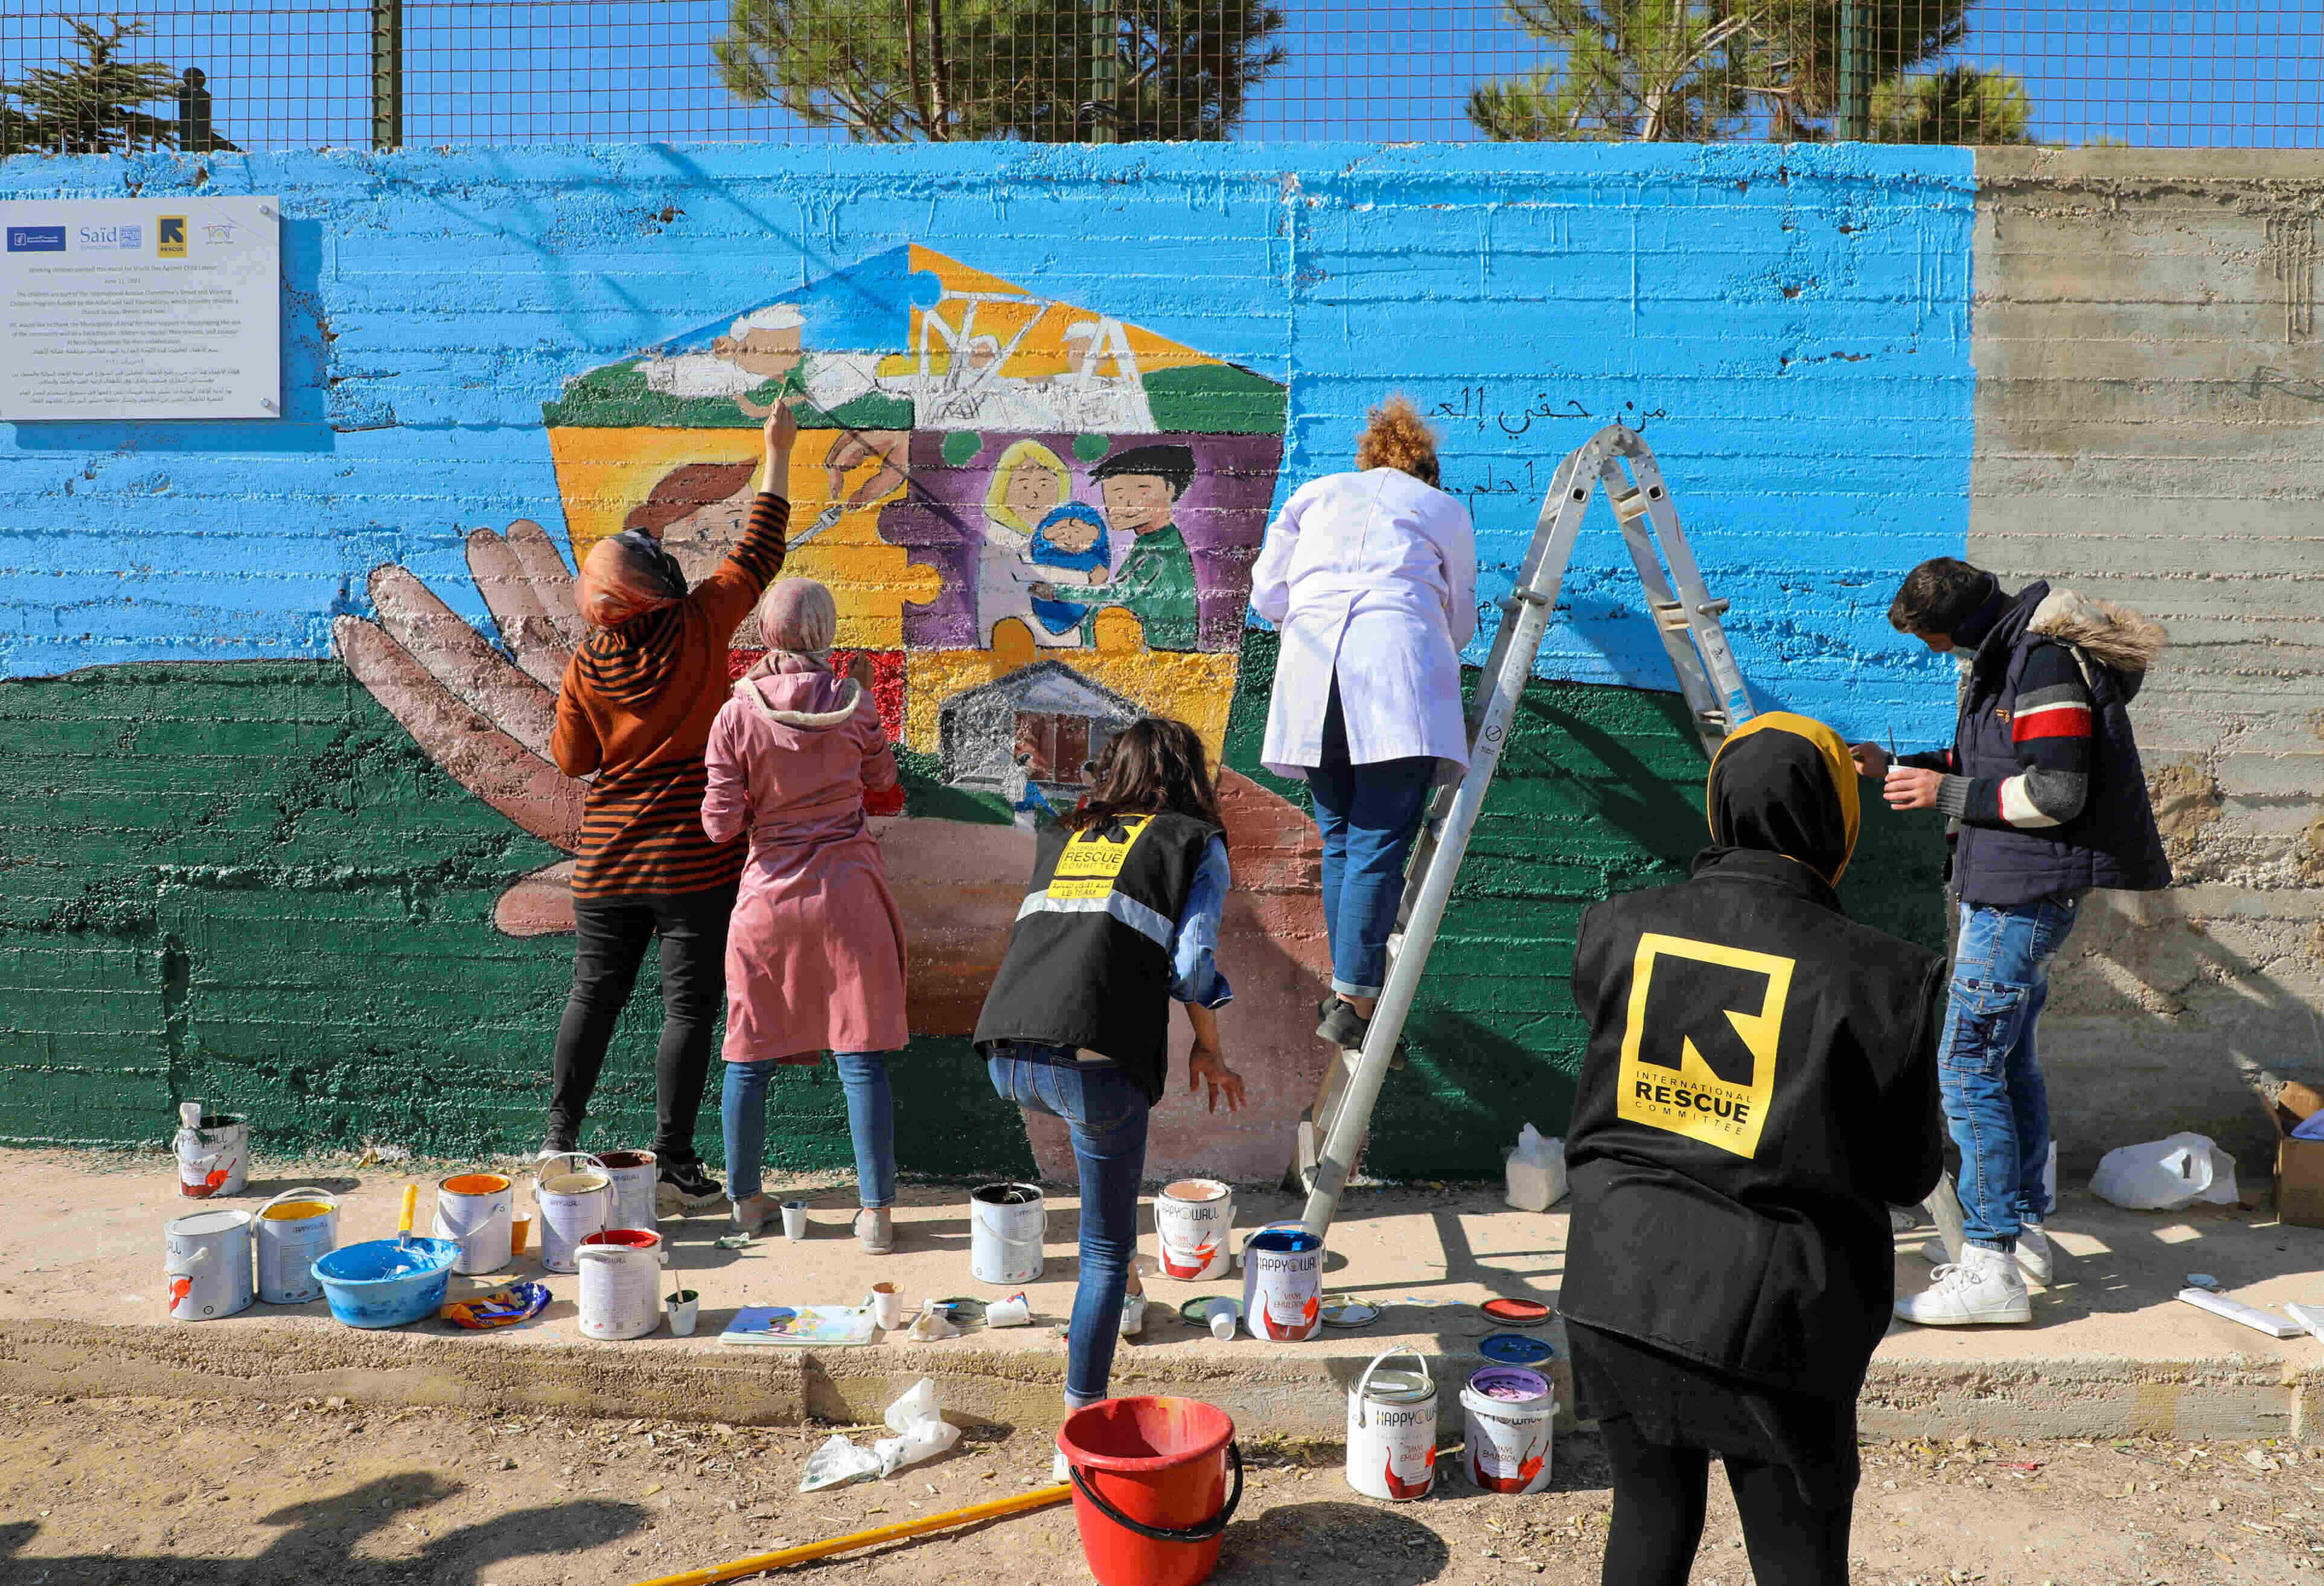 Teenagers taking part in an IRC child protection program in Lebanon paint a mural for World Children's Day 2021 to help raise awareness of children's rights. Photo: IRC